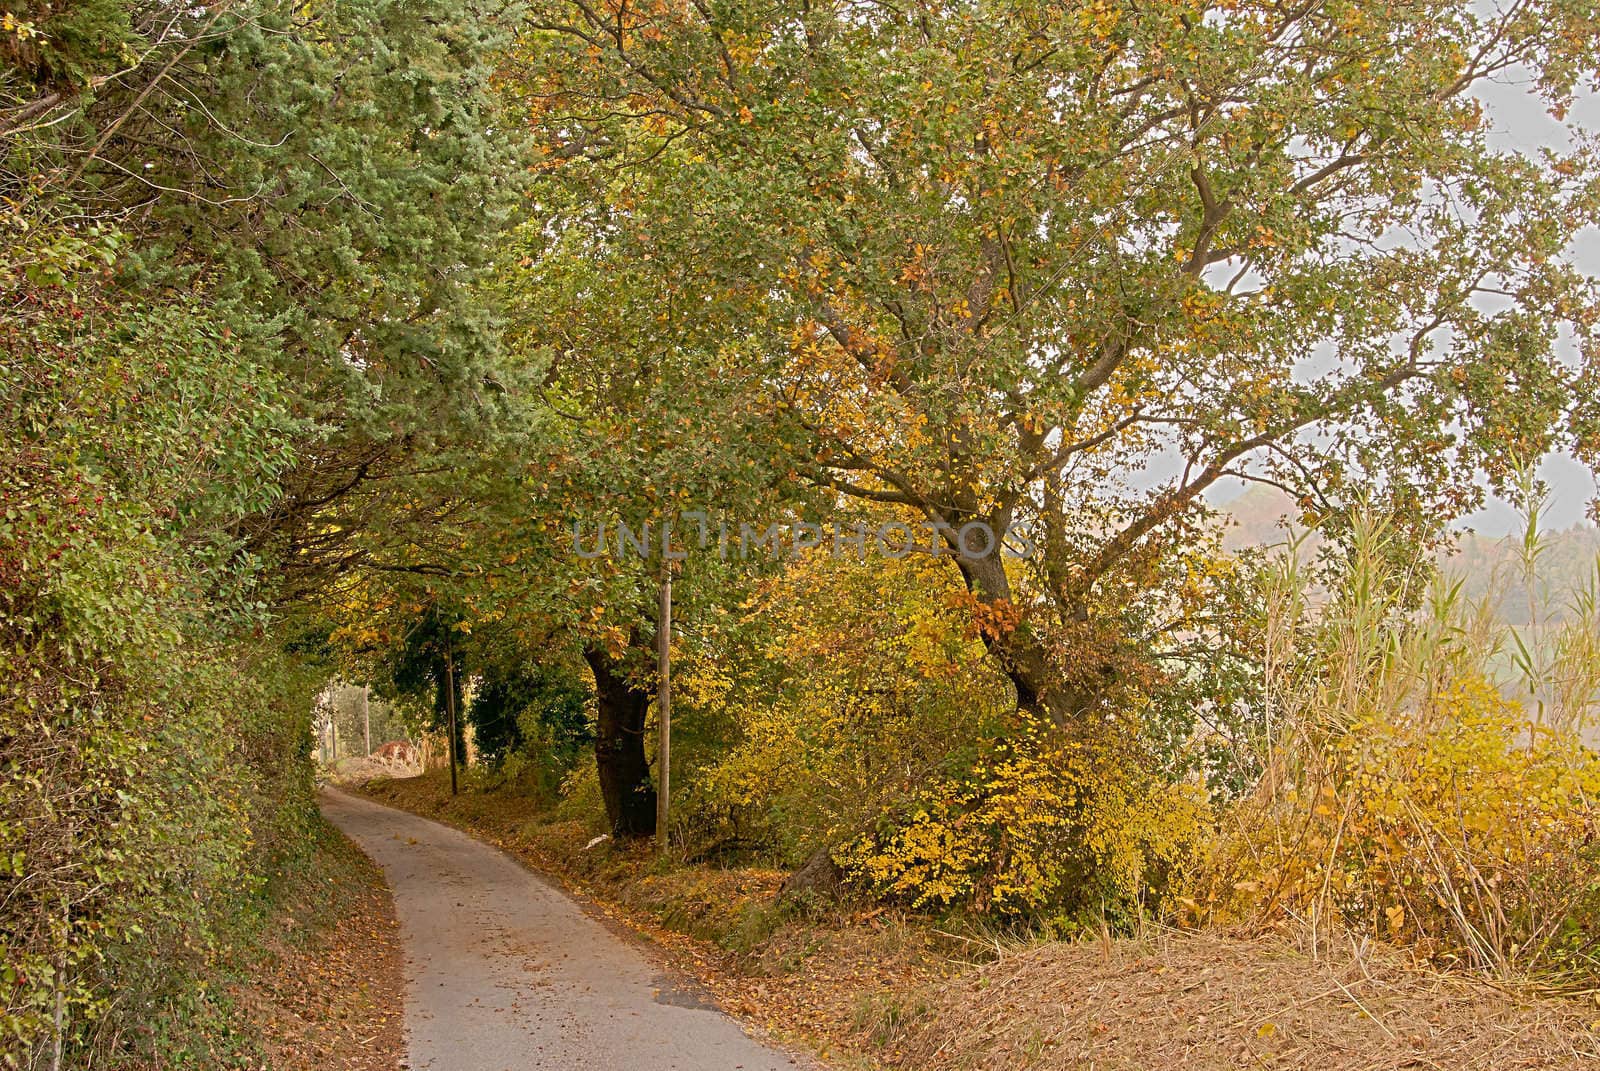 Golden trees surround the bend in the road in the autumn at midday